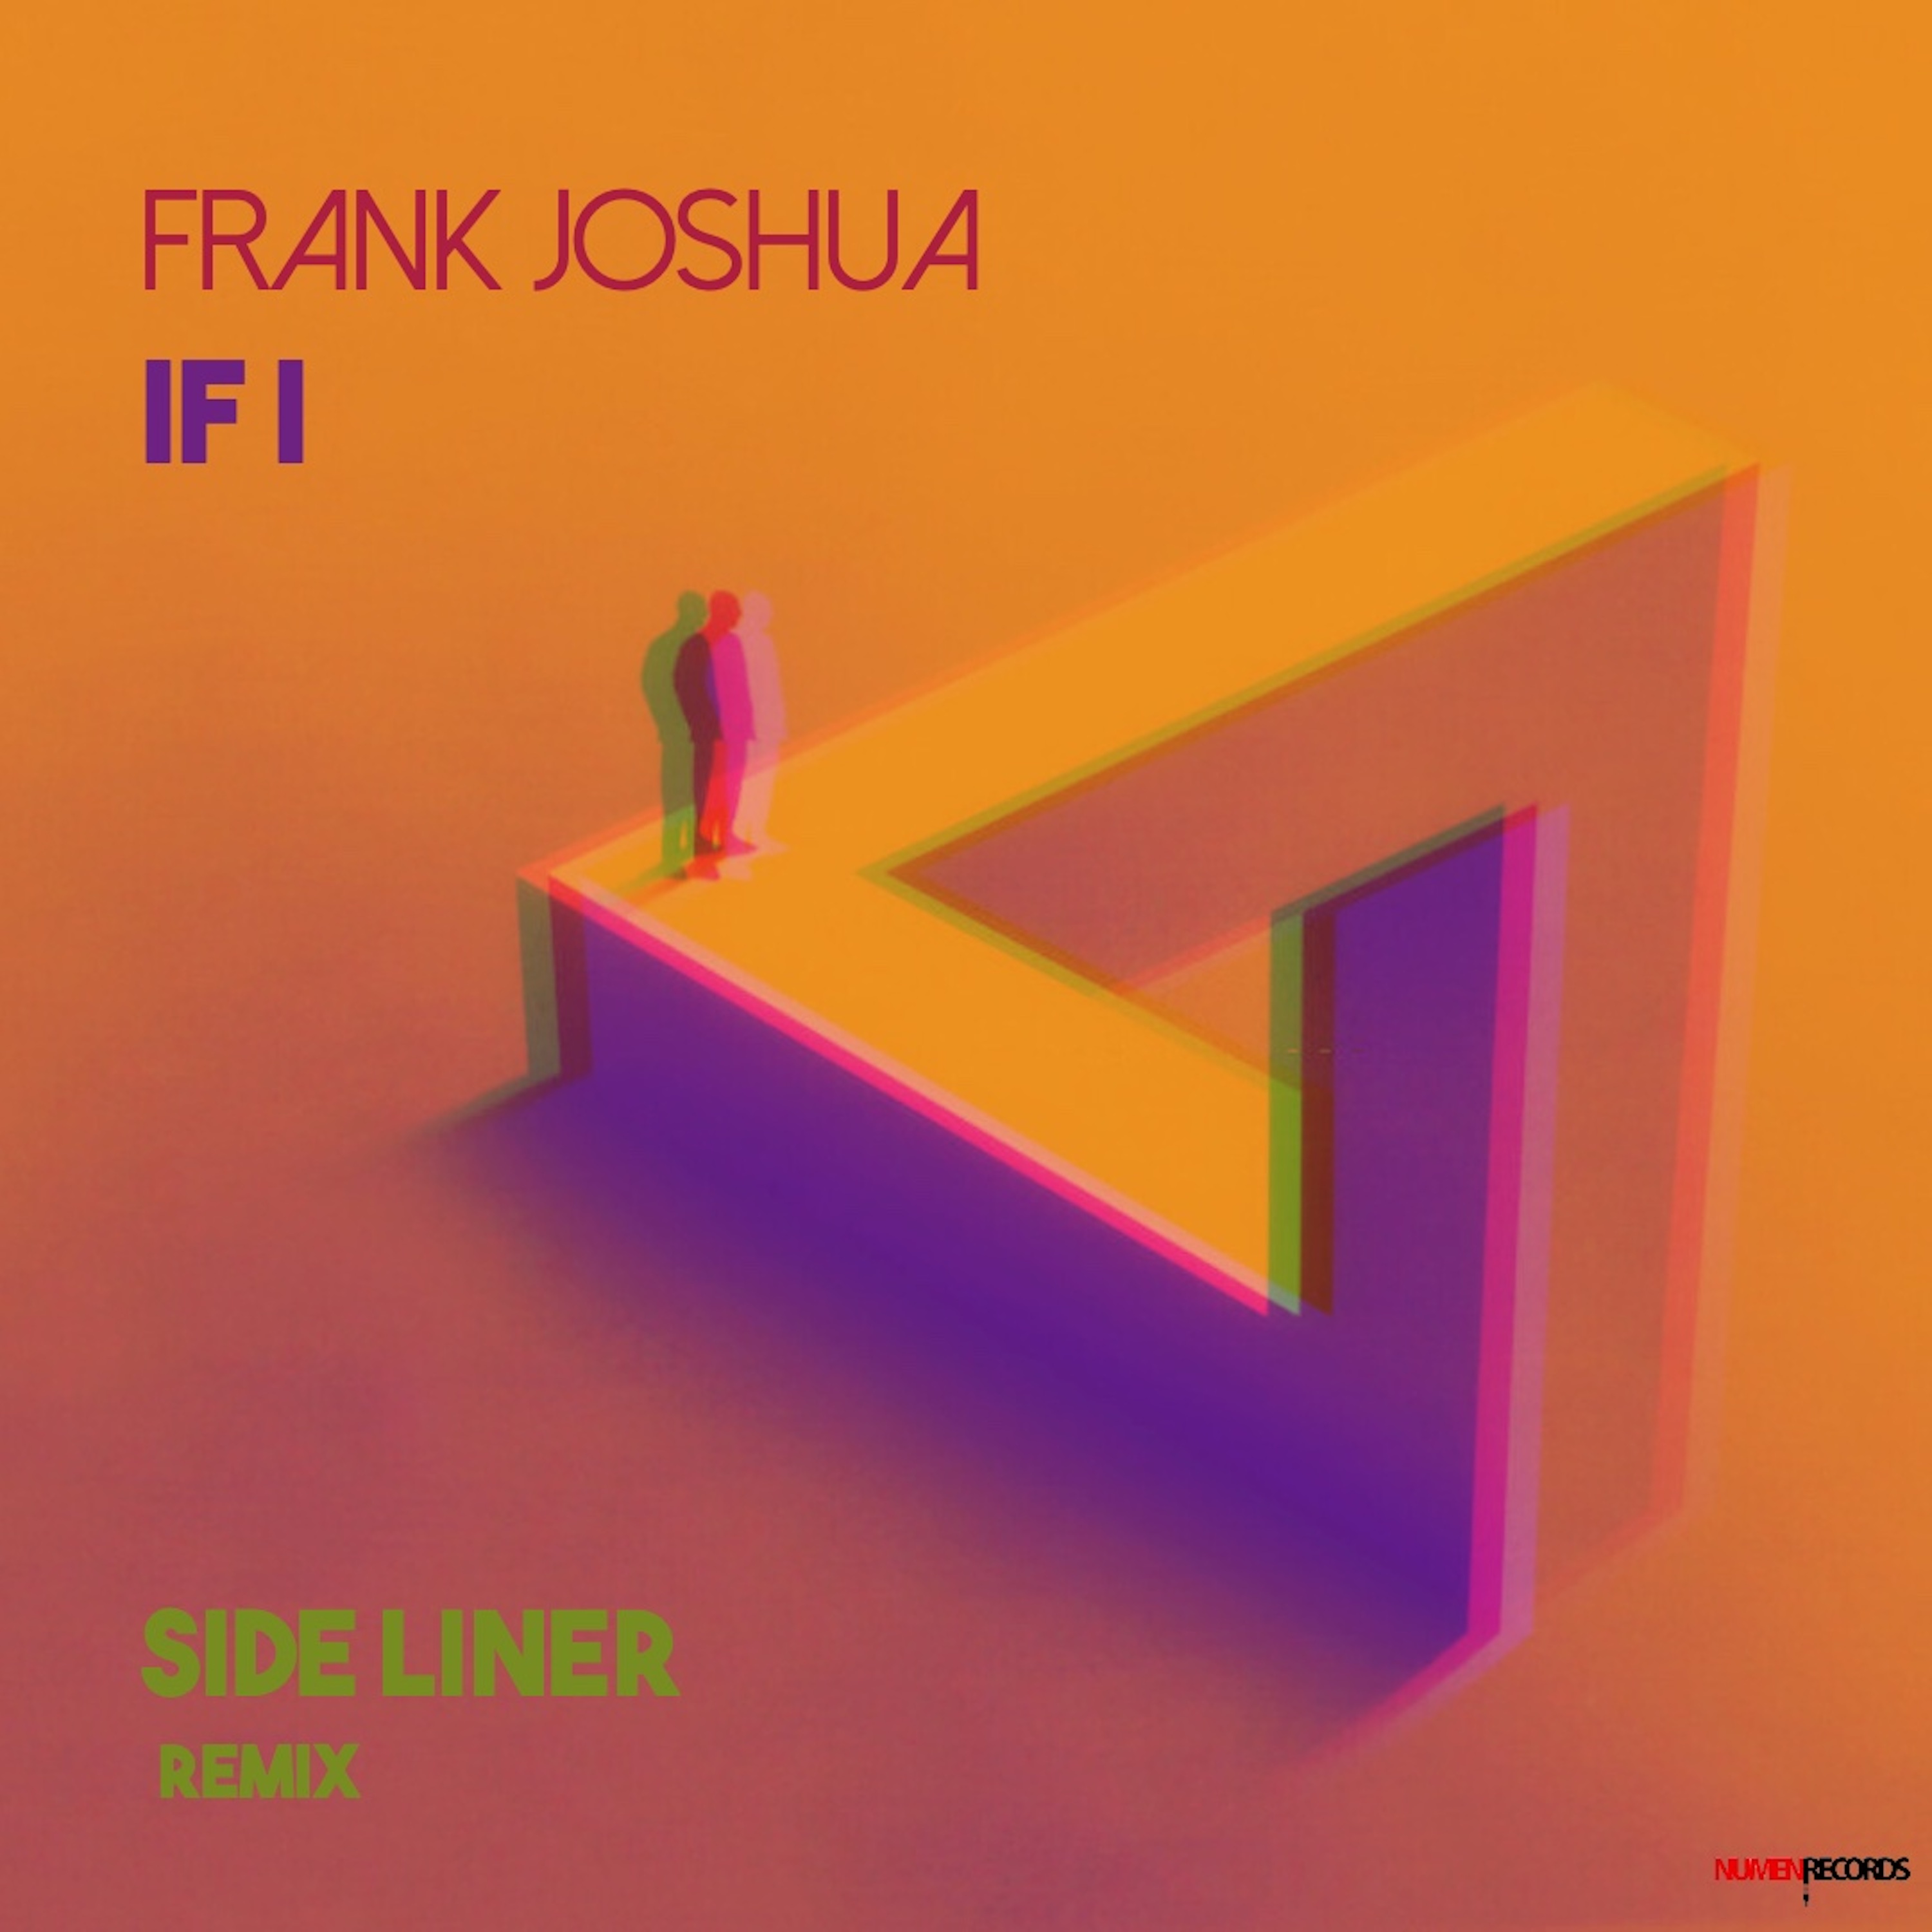 Frank Joshua presents a brand new & magical remix for “If I” created by Side Liner